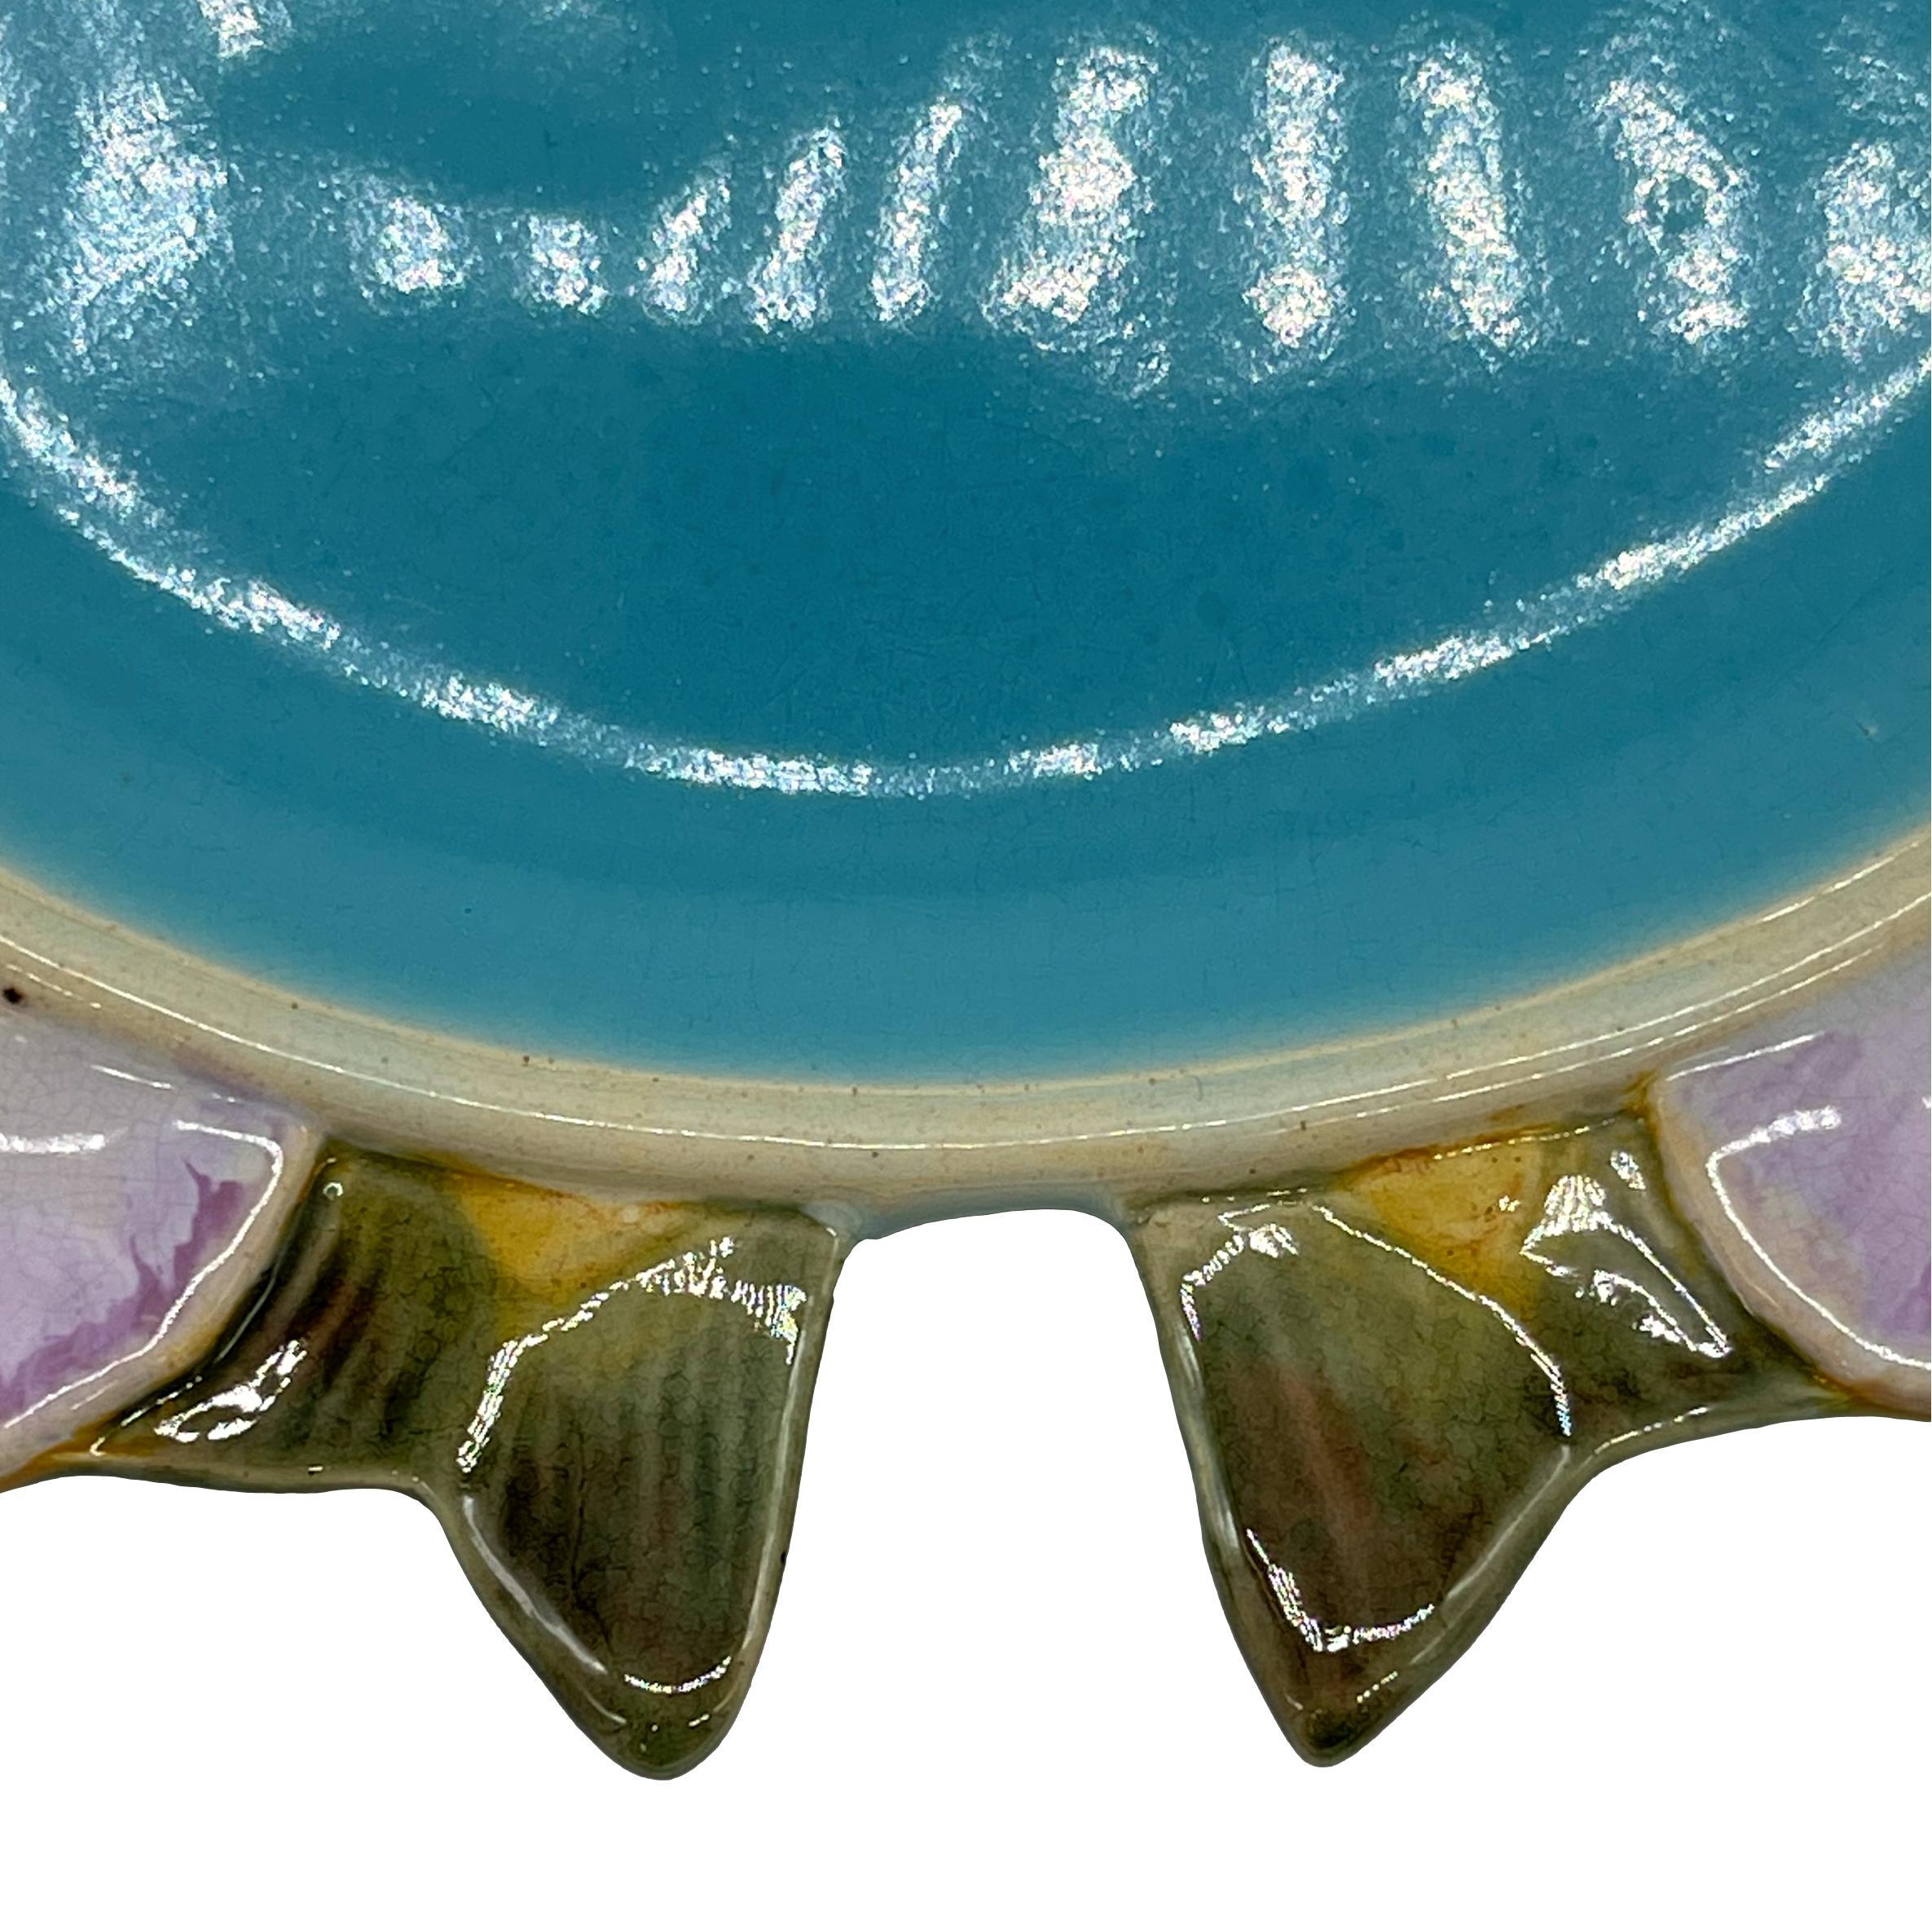 Molded Minton Majolica Trefoil Fish Plate, Turquoise and Marbled Pinks, Dated 1875